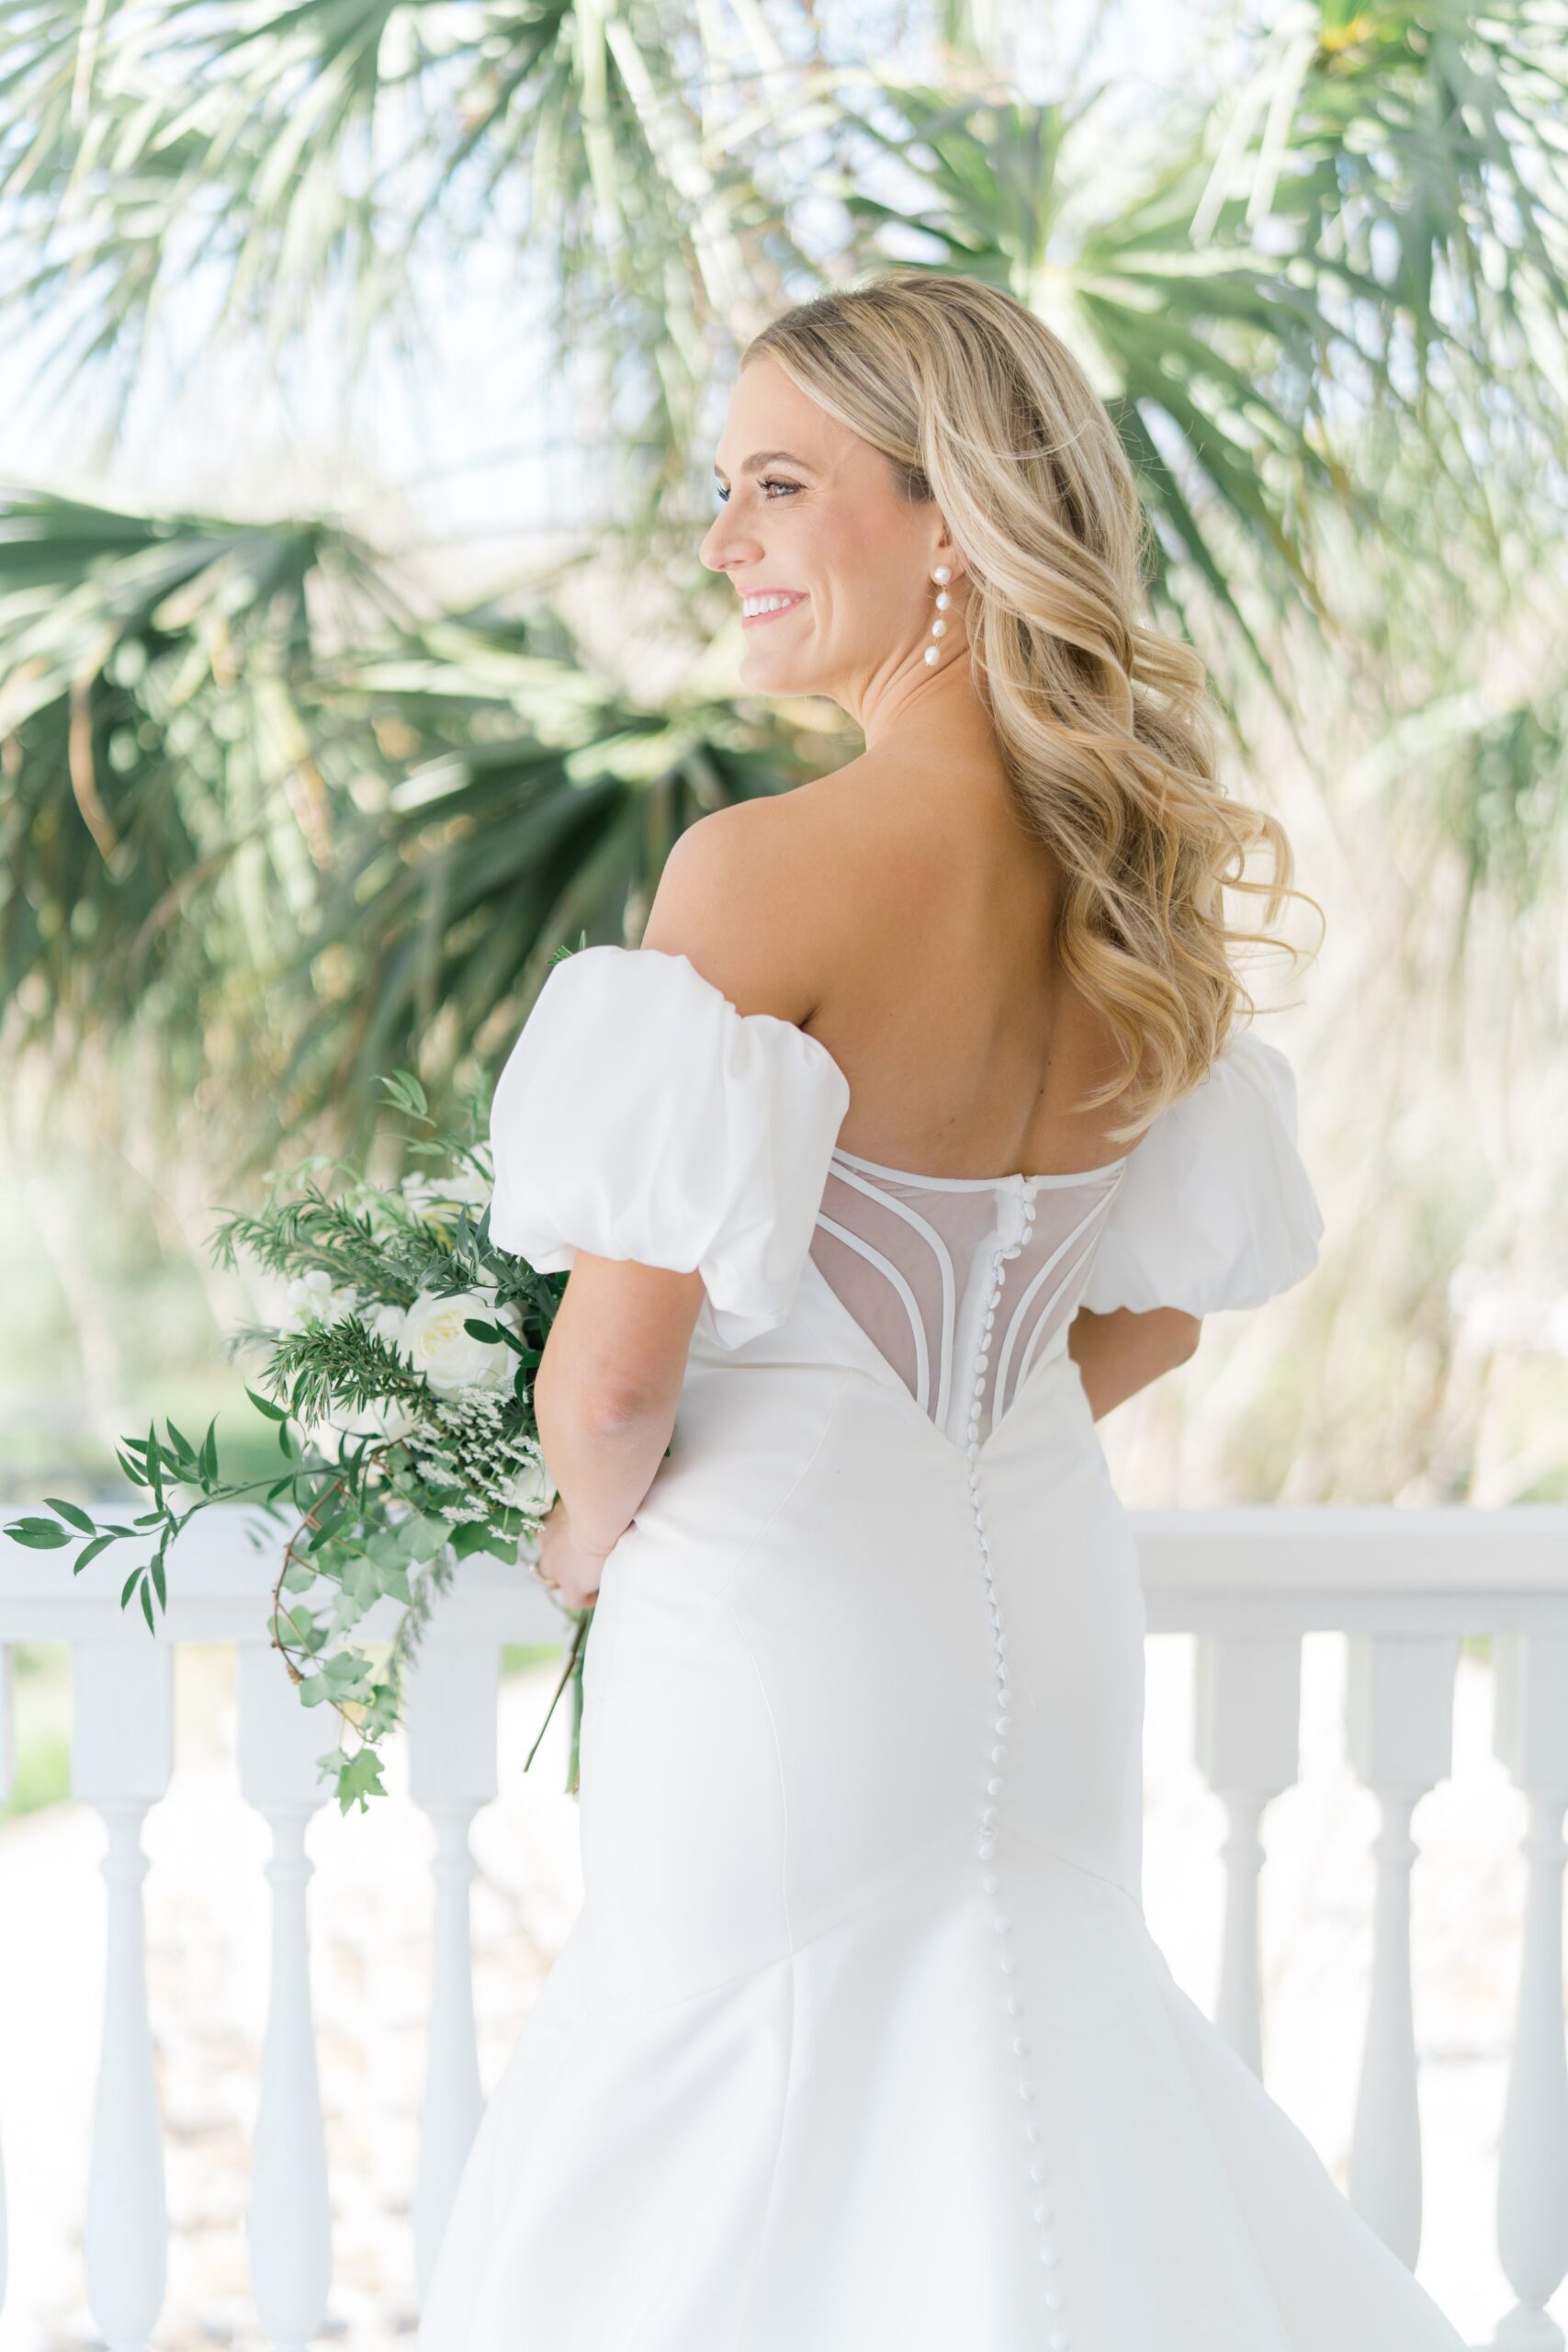 Statement sleeves and back of dress. Classic Charleston bride.  Palm trees at Charleston spring wedding. old wide awake.